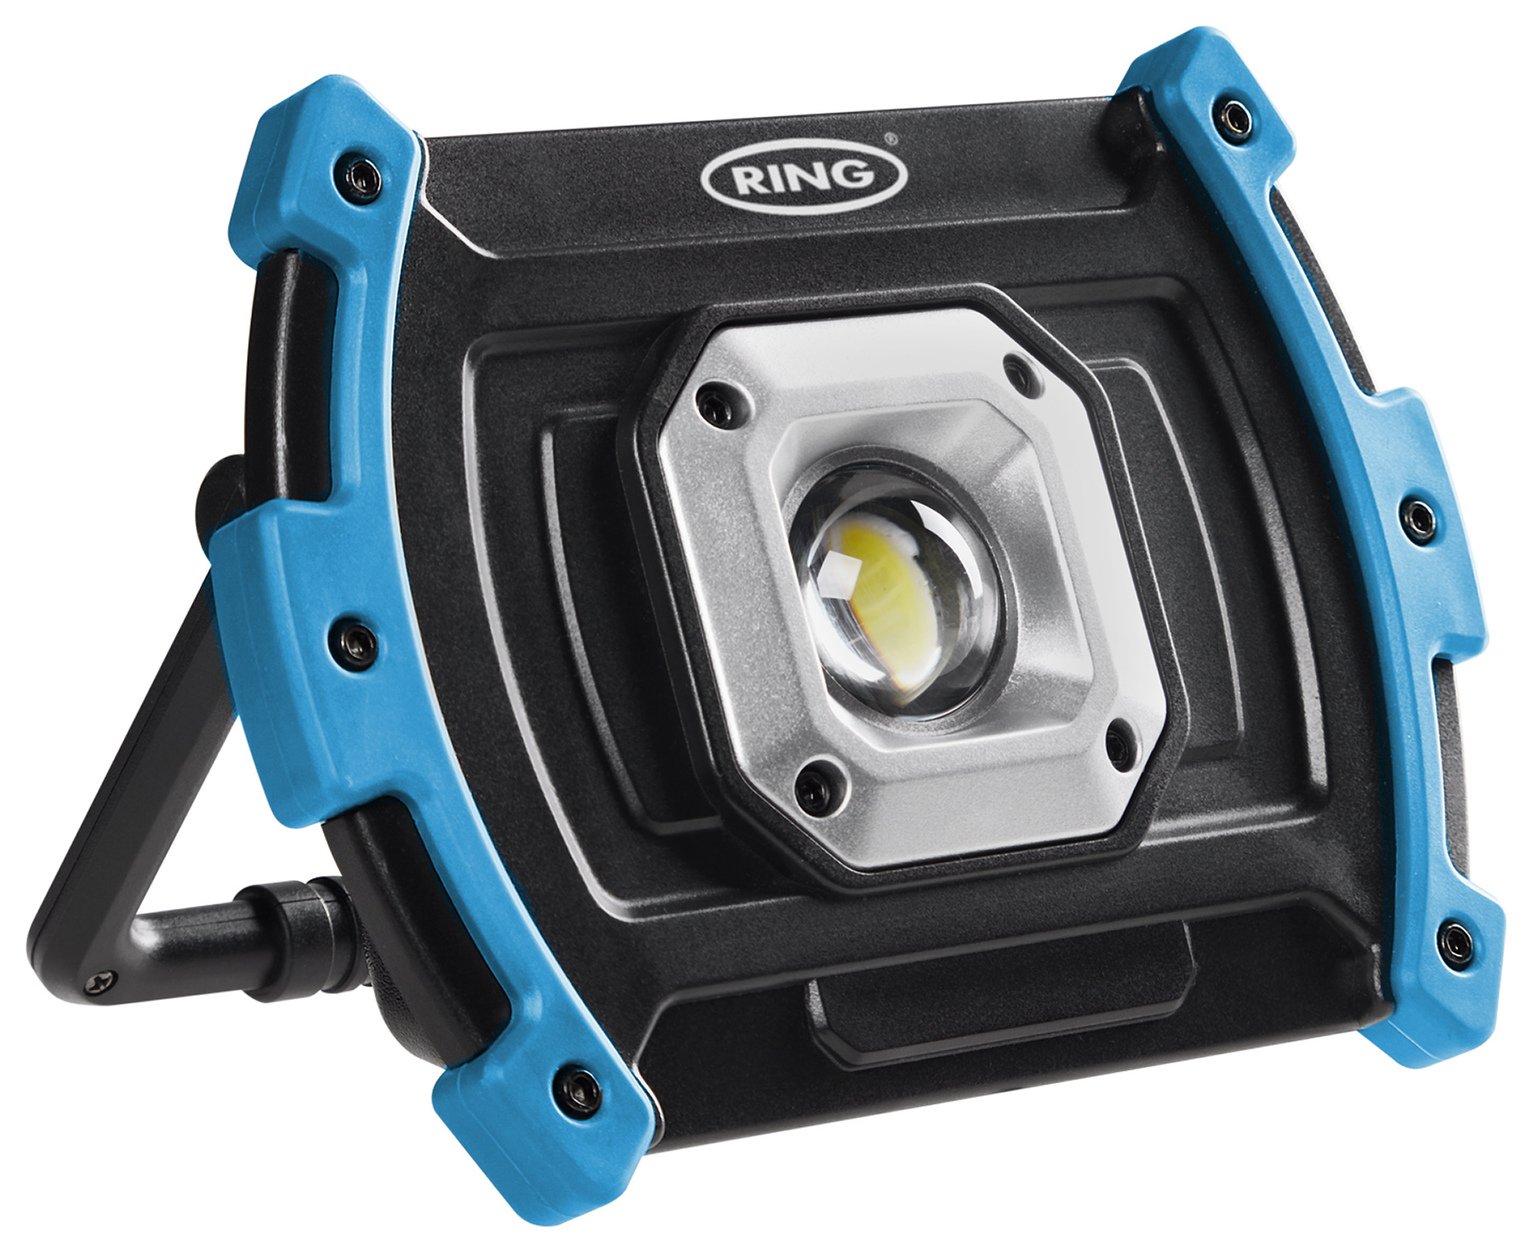 Ring RWL600 600 Lumens LED Rechargeable Work Light